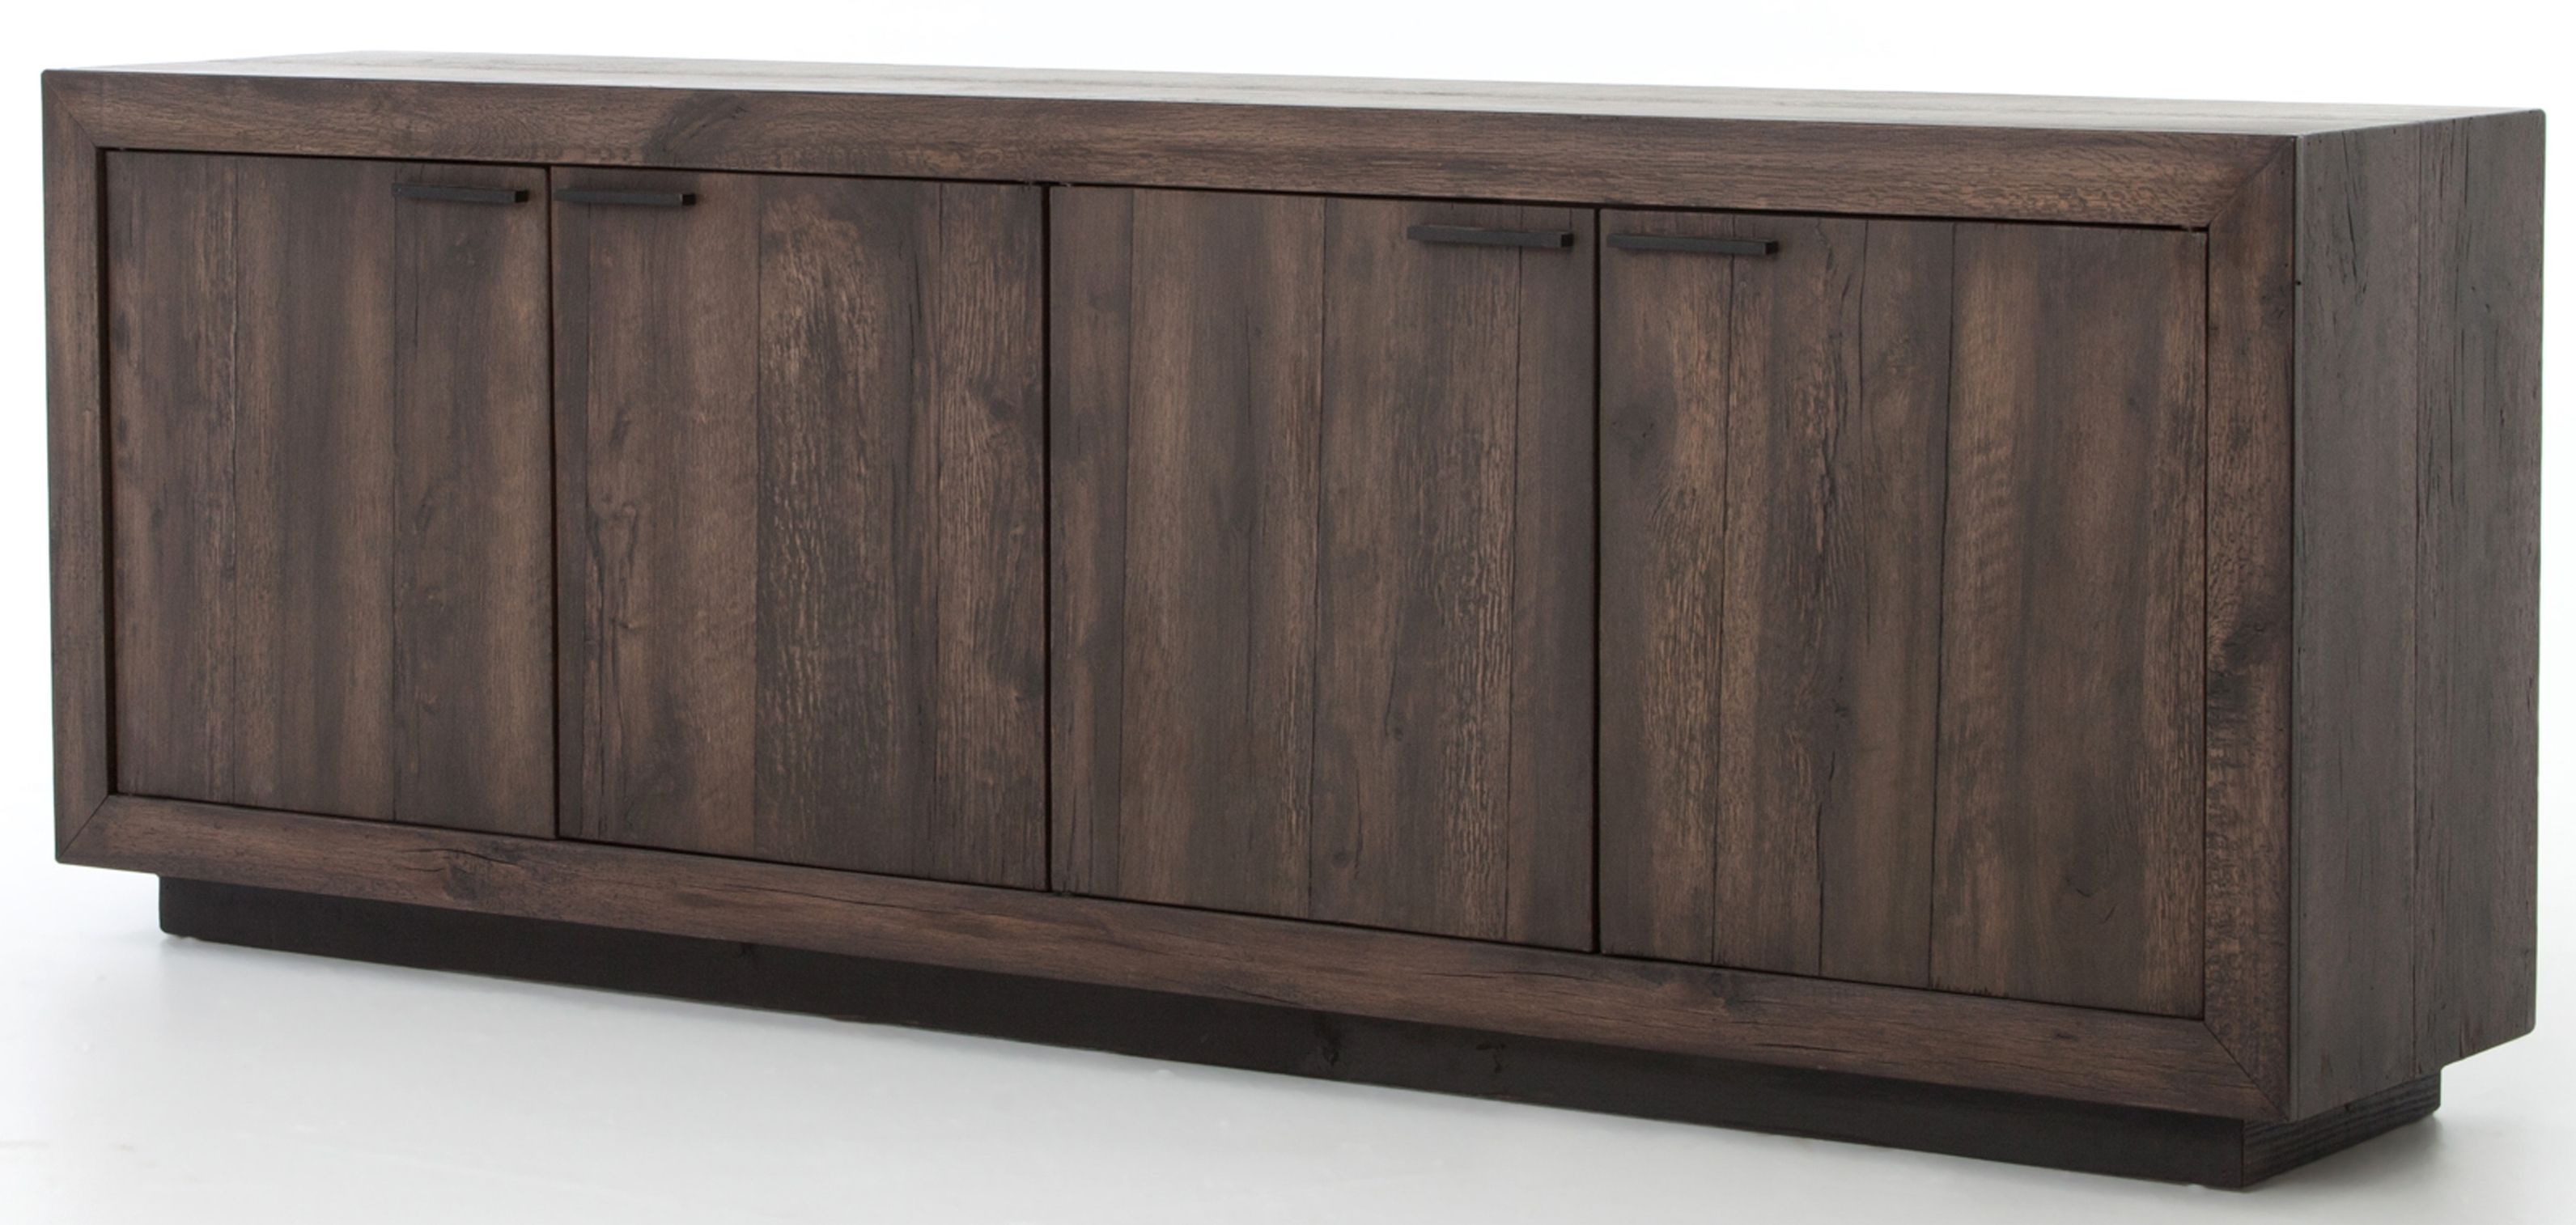 Cabinets, Consoles & Sofa Tables | Htgt Furniture With Most Recently Released Light Brown Reclaimed Elm &amp; Pine 84 Inch Sideboards (View 8 of 20)